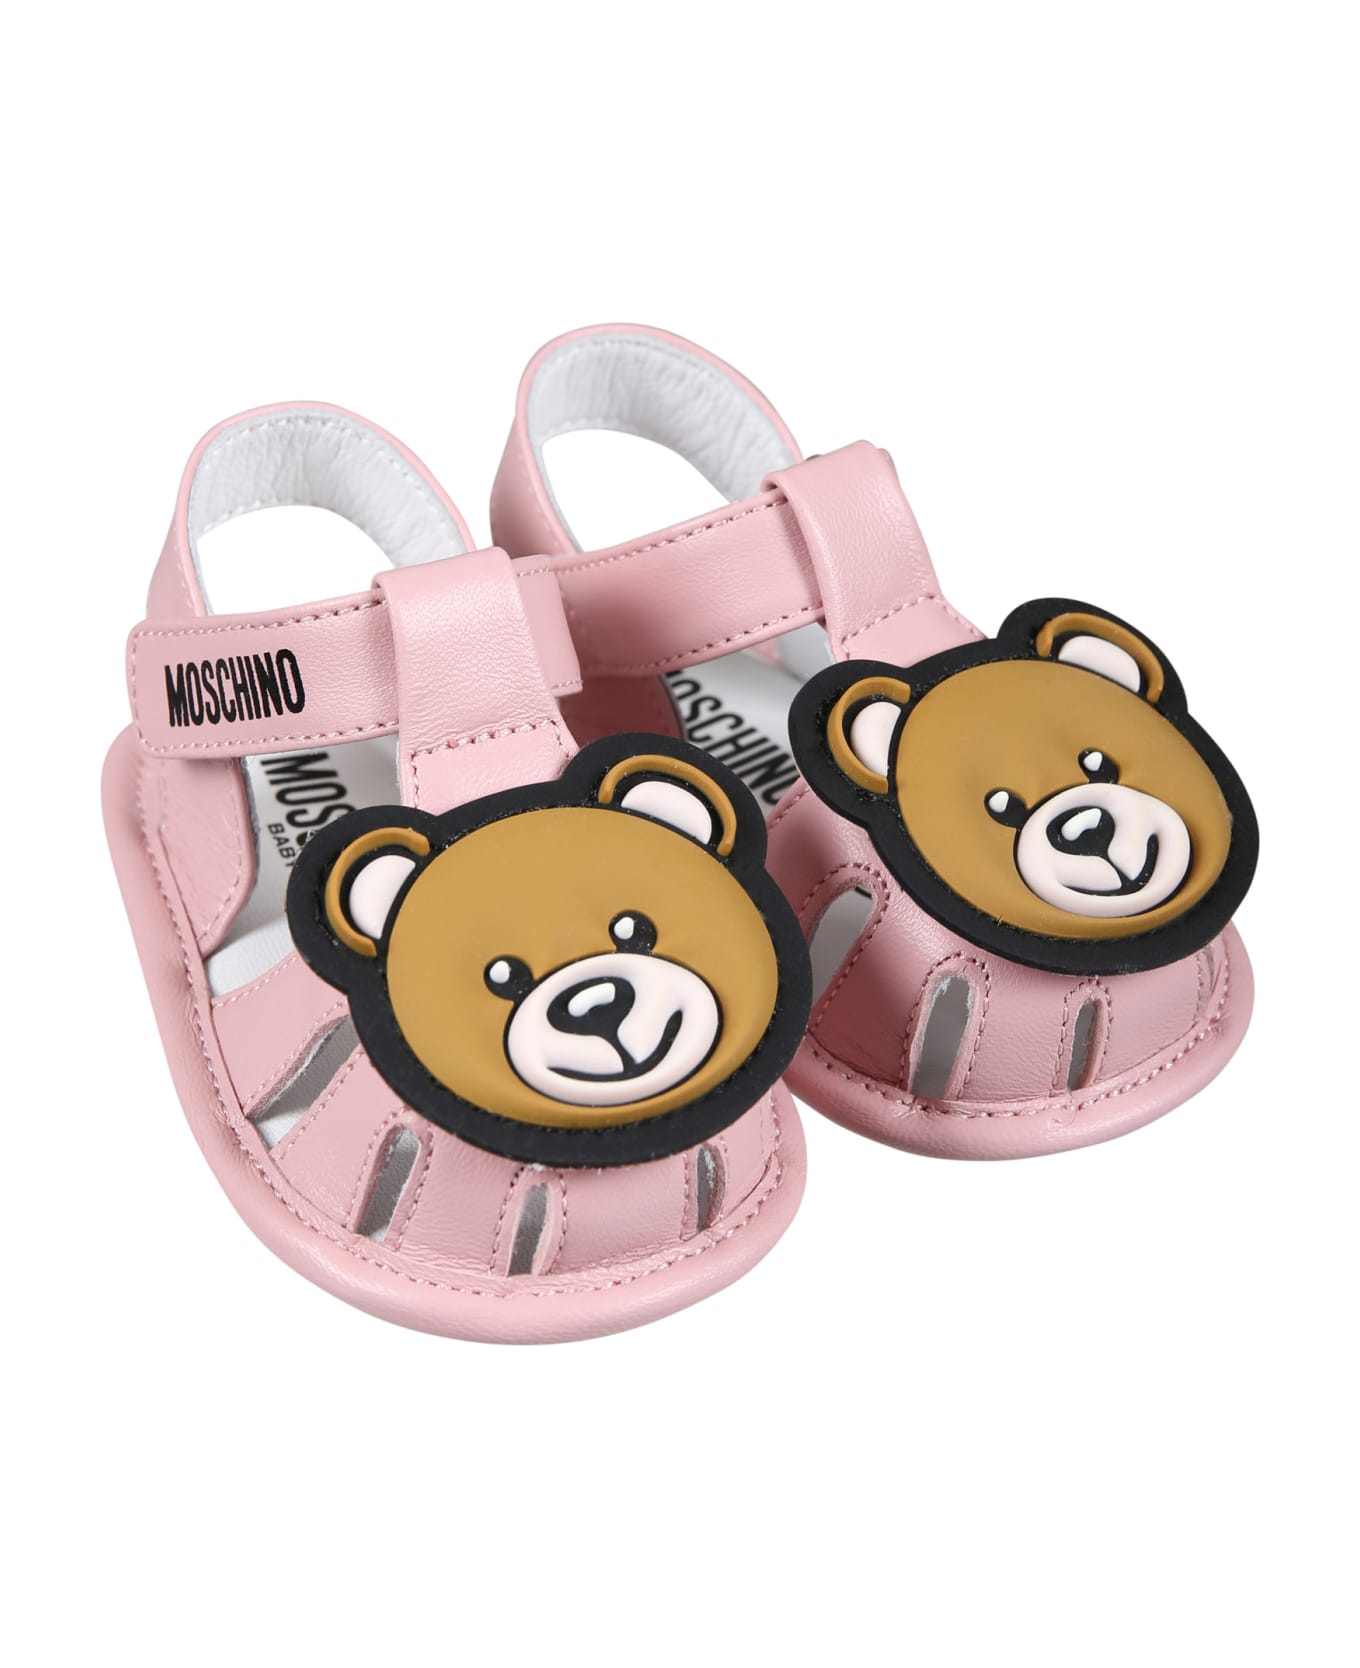 Moschino Pink Sandals For Baby Girl With Teddy Bear - Pink シューズ